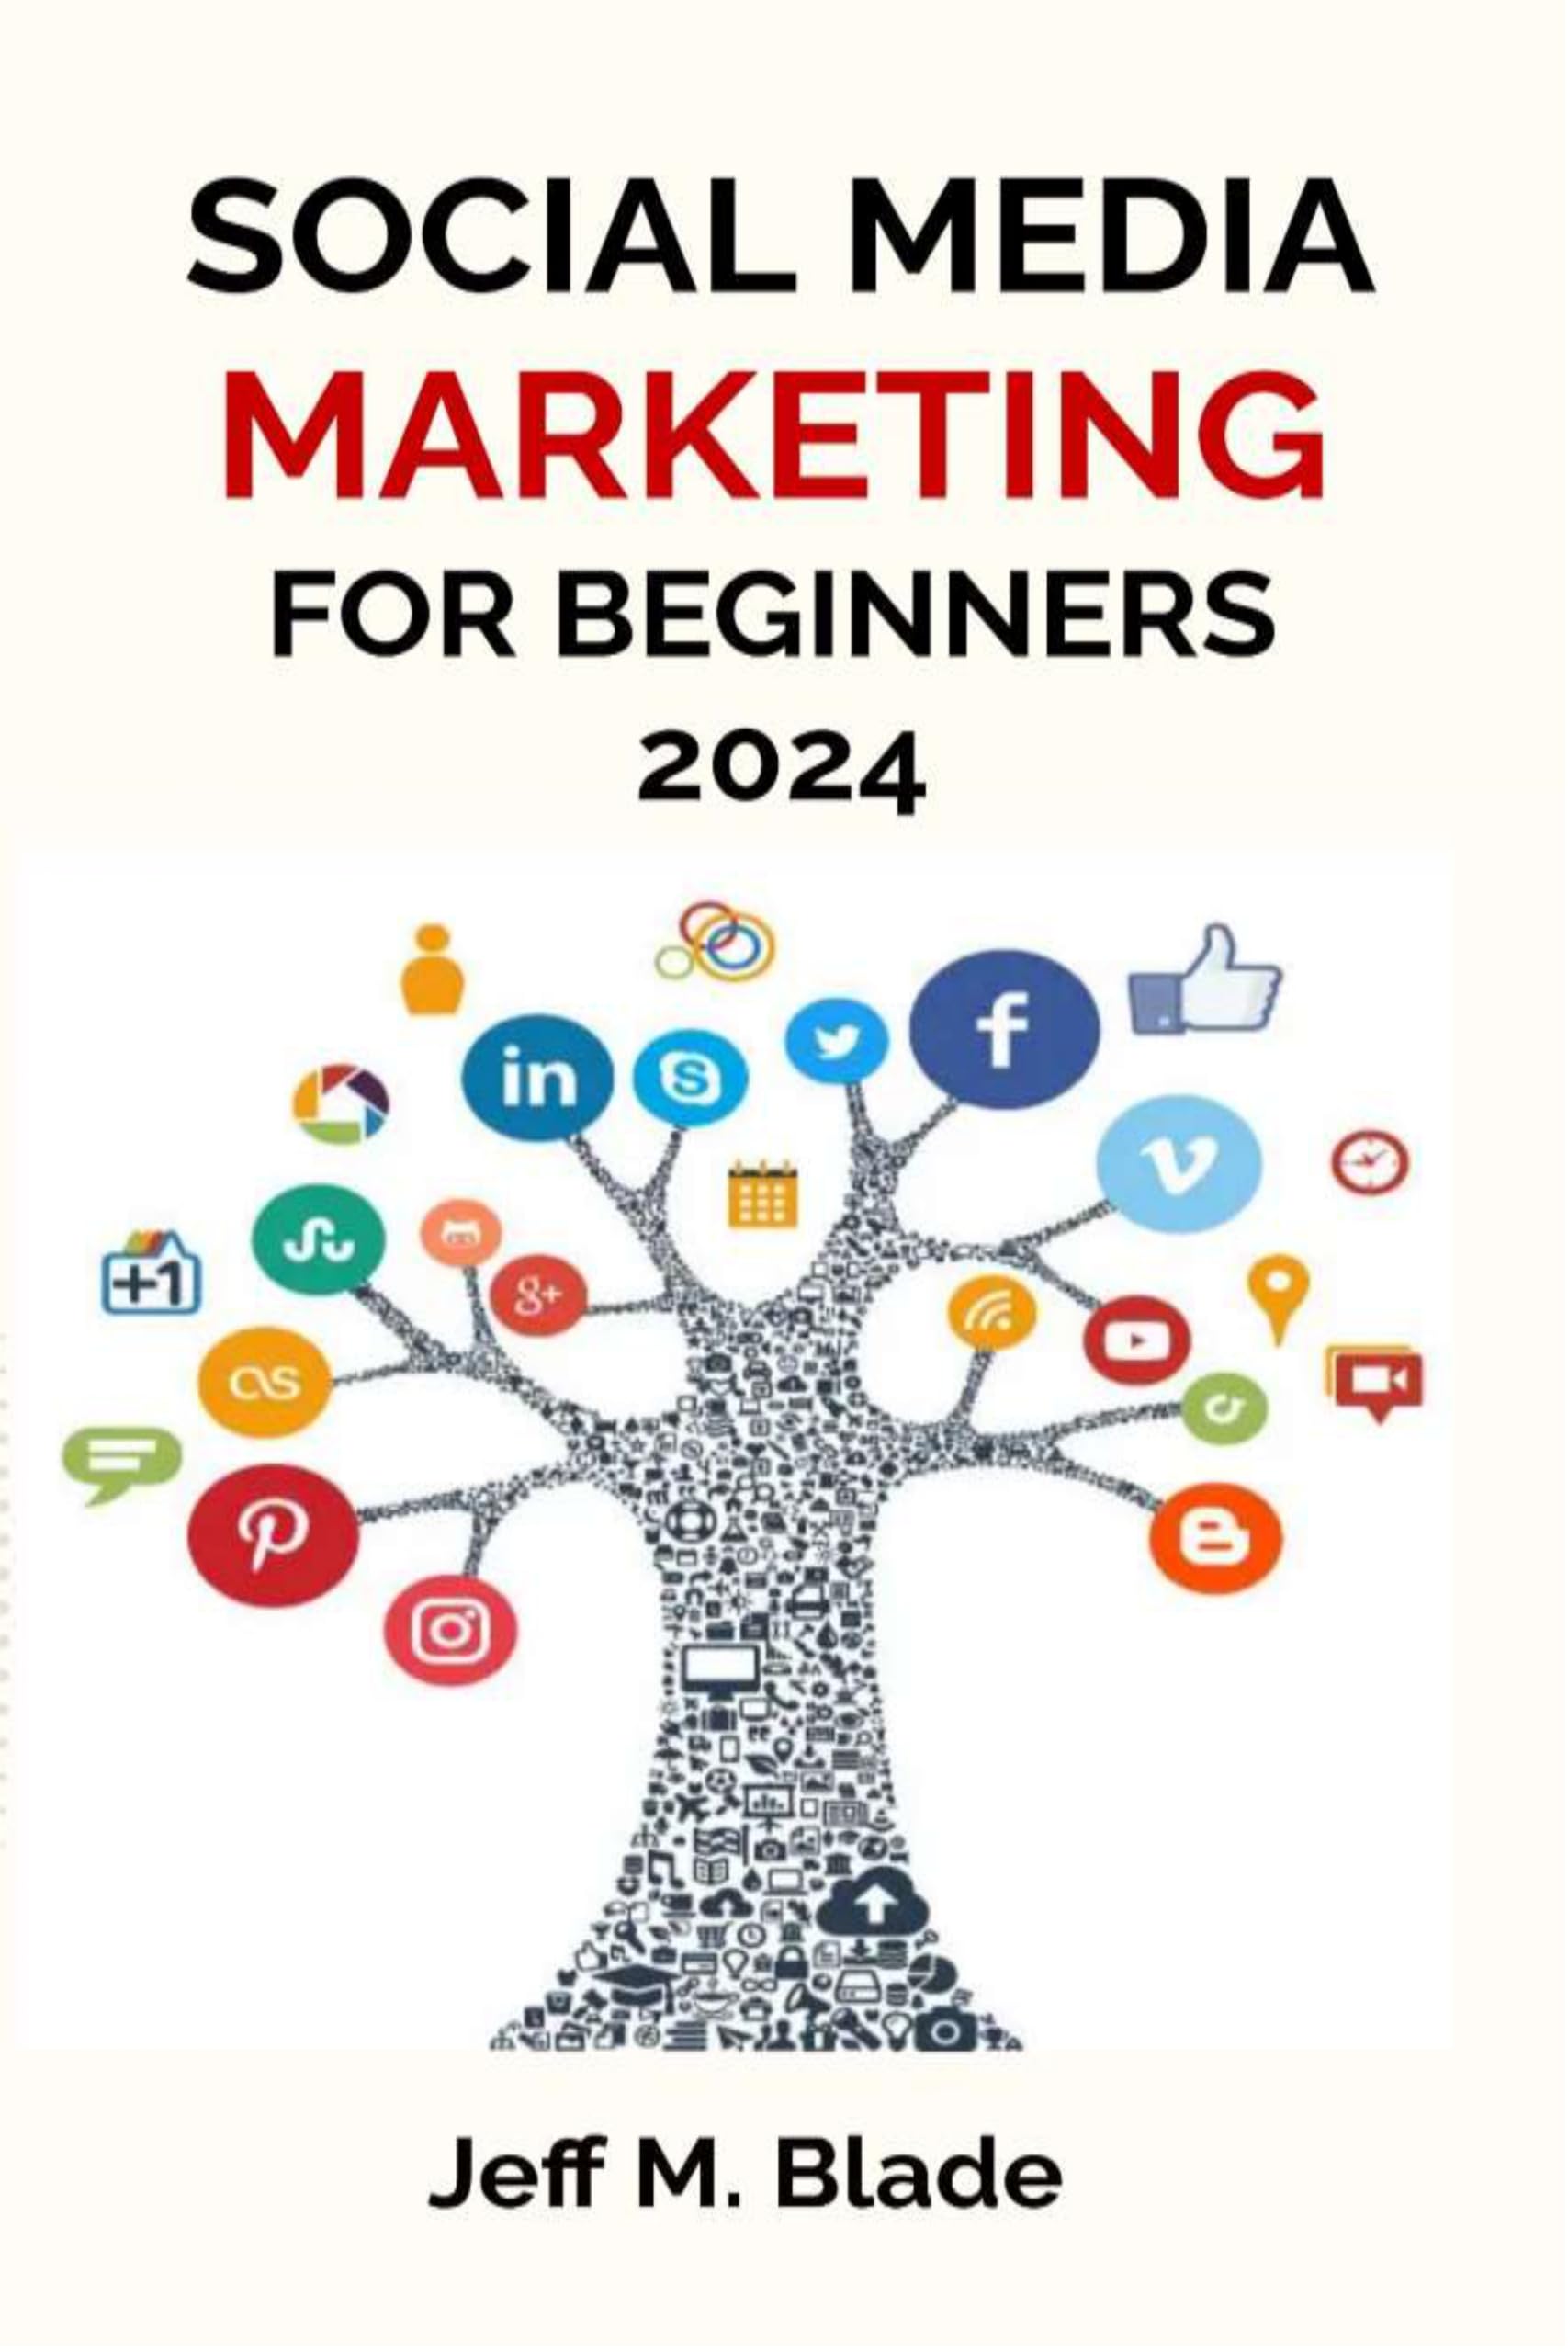 SOCIAL MEDIA MARKETING FOR BEGINNERS 2024: Your Step-by-Step Guide to Building a Strong Online Business Presence